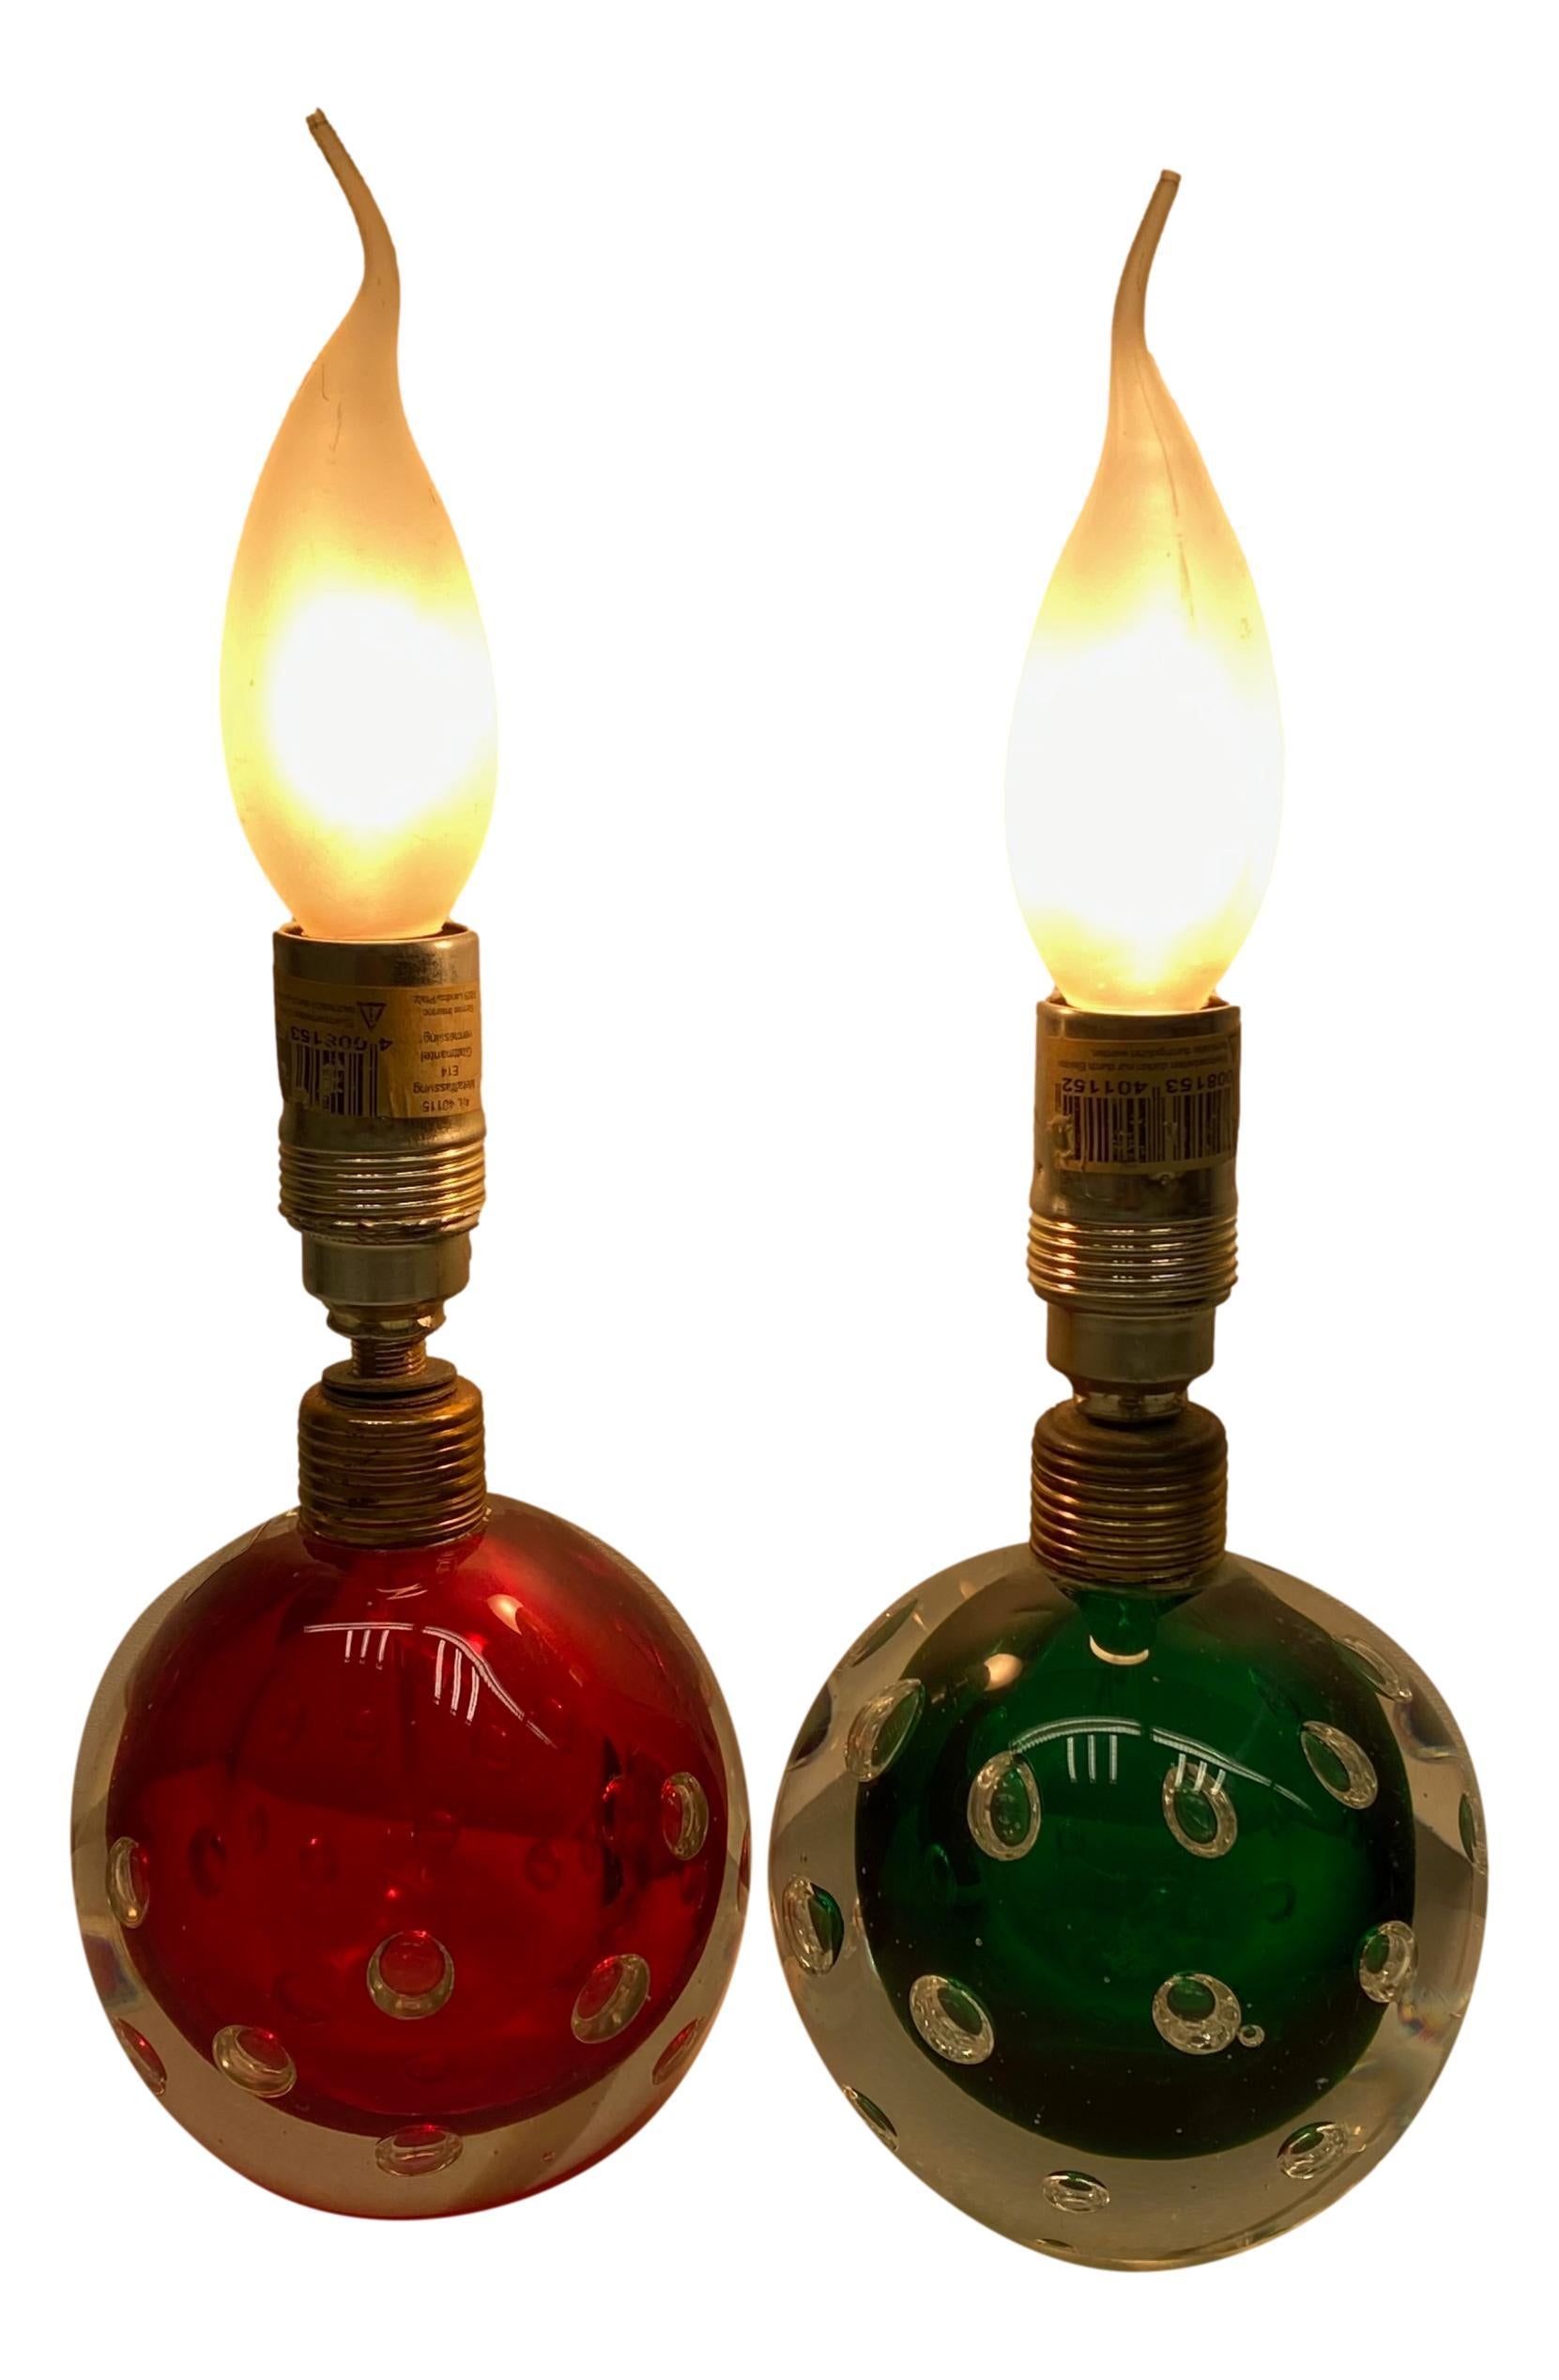 Beautiful pair of sommerso table lamps or side table lamps, with melded down air bubble. Made of Murano glass, made by Seguso Dalla Venezia, & C. Srl. (1951-65) Murano, Italy. Each light requires one European E14 / 110 Volt Candelabra bulb, each